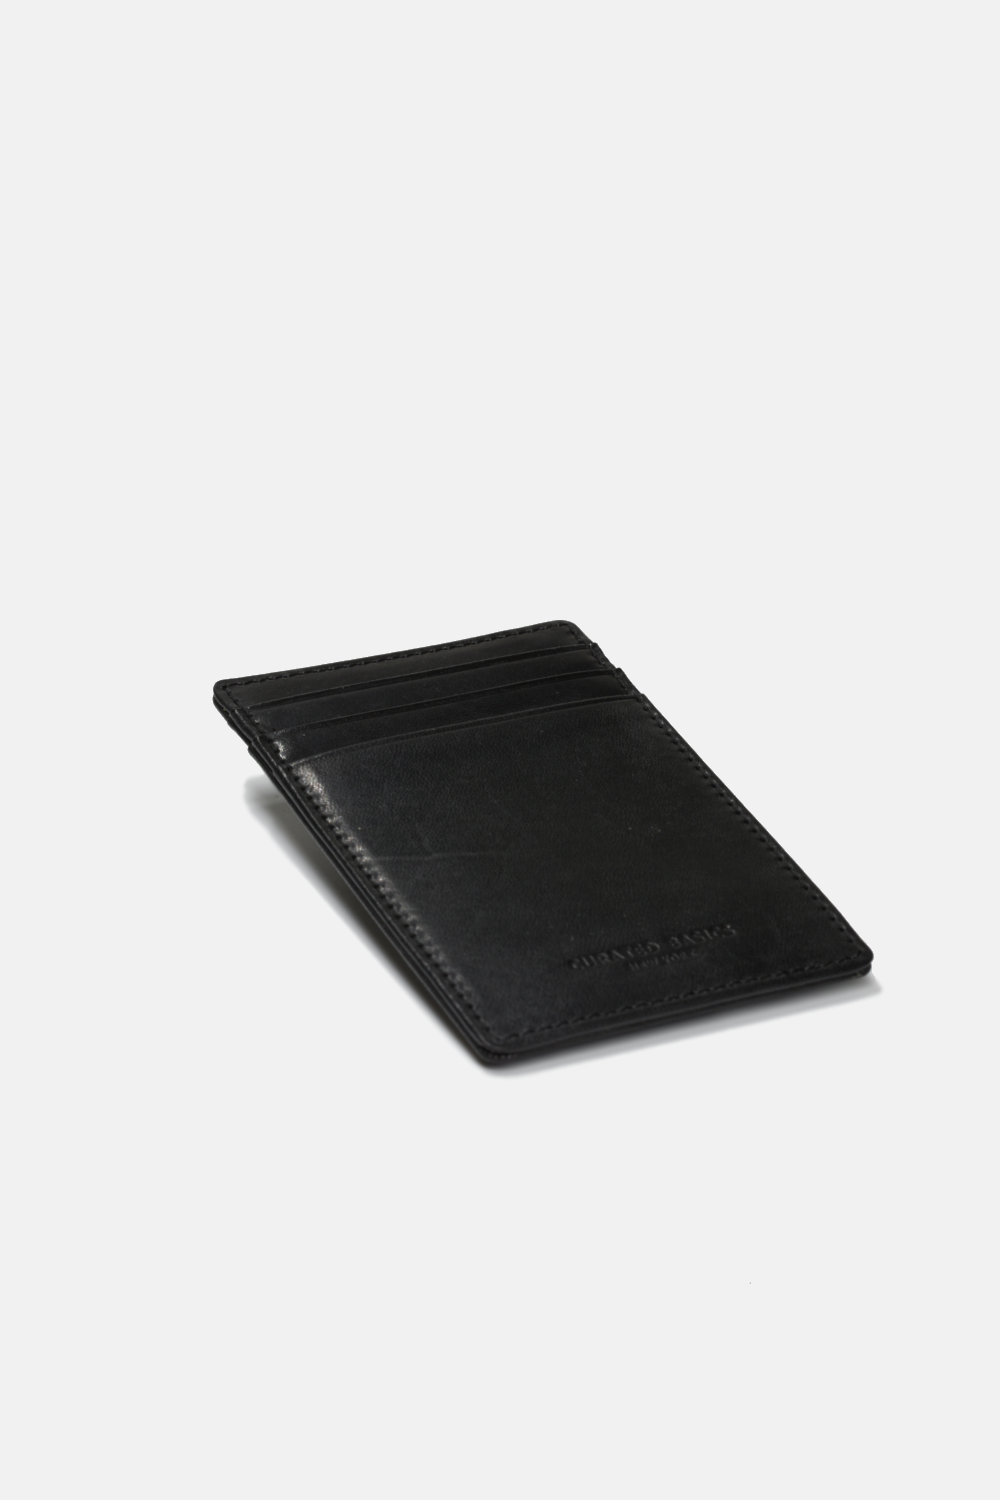 black wallet against a white background